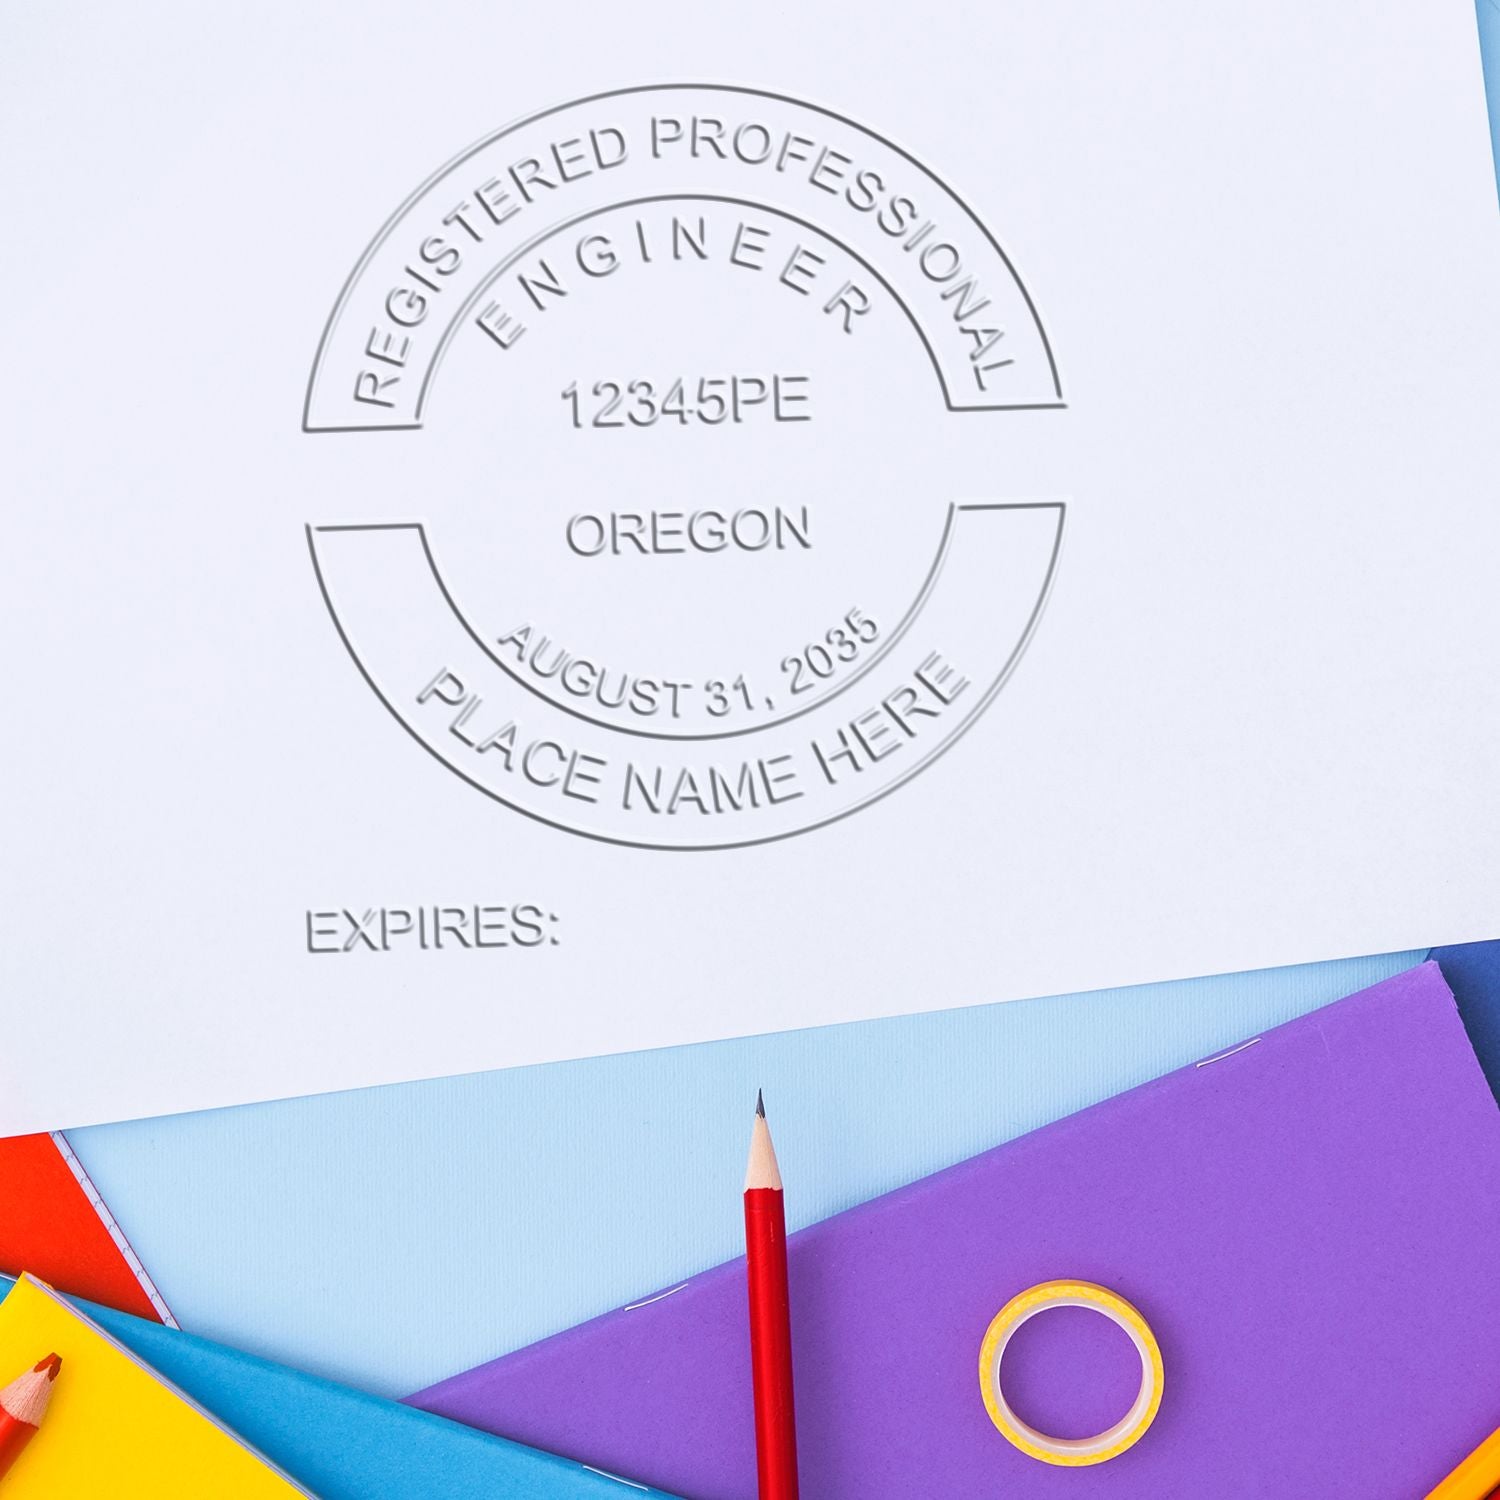 A photograph of the Hybrid Oregon Engineer Seal stamp impression reveals a vivid, professional image of the on paper.